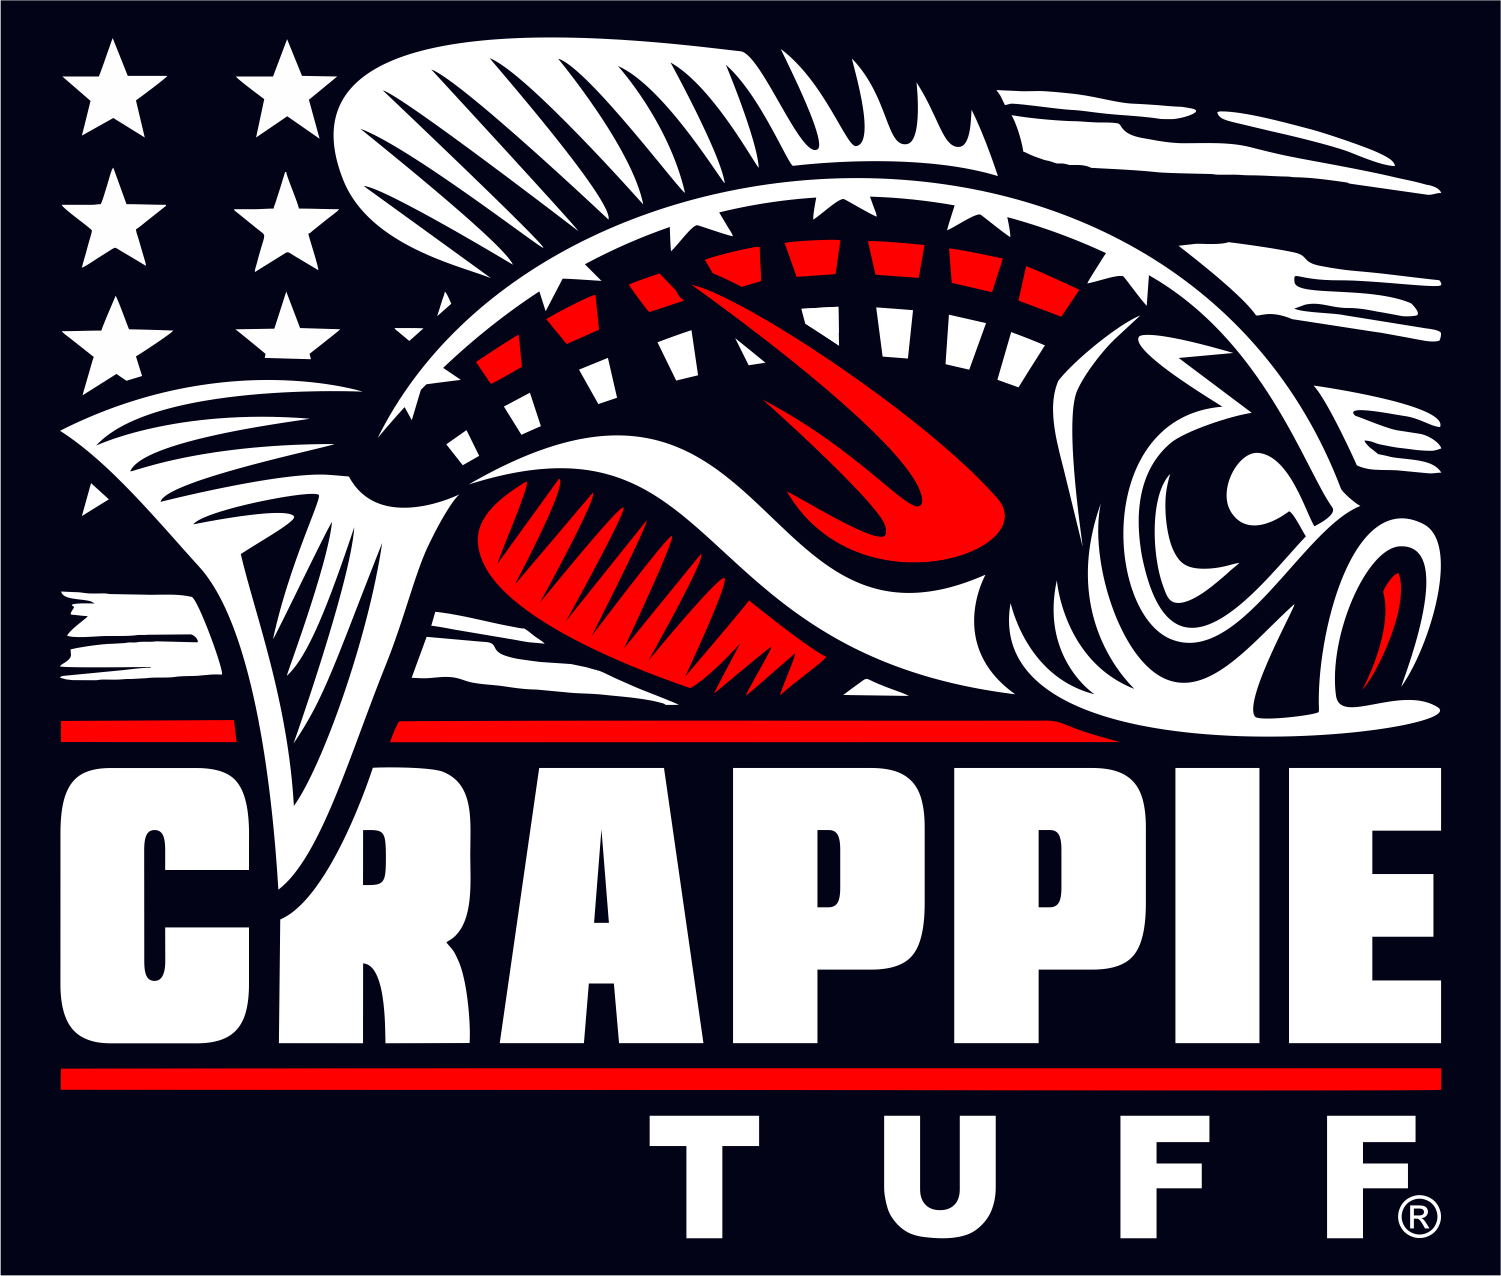 Crappie Tuff -Patriot - 5 x 4.25 -water proof Decal - Crappie